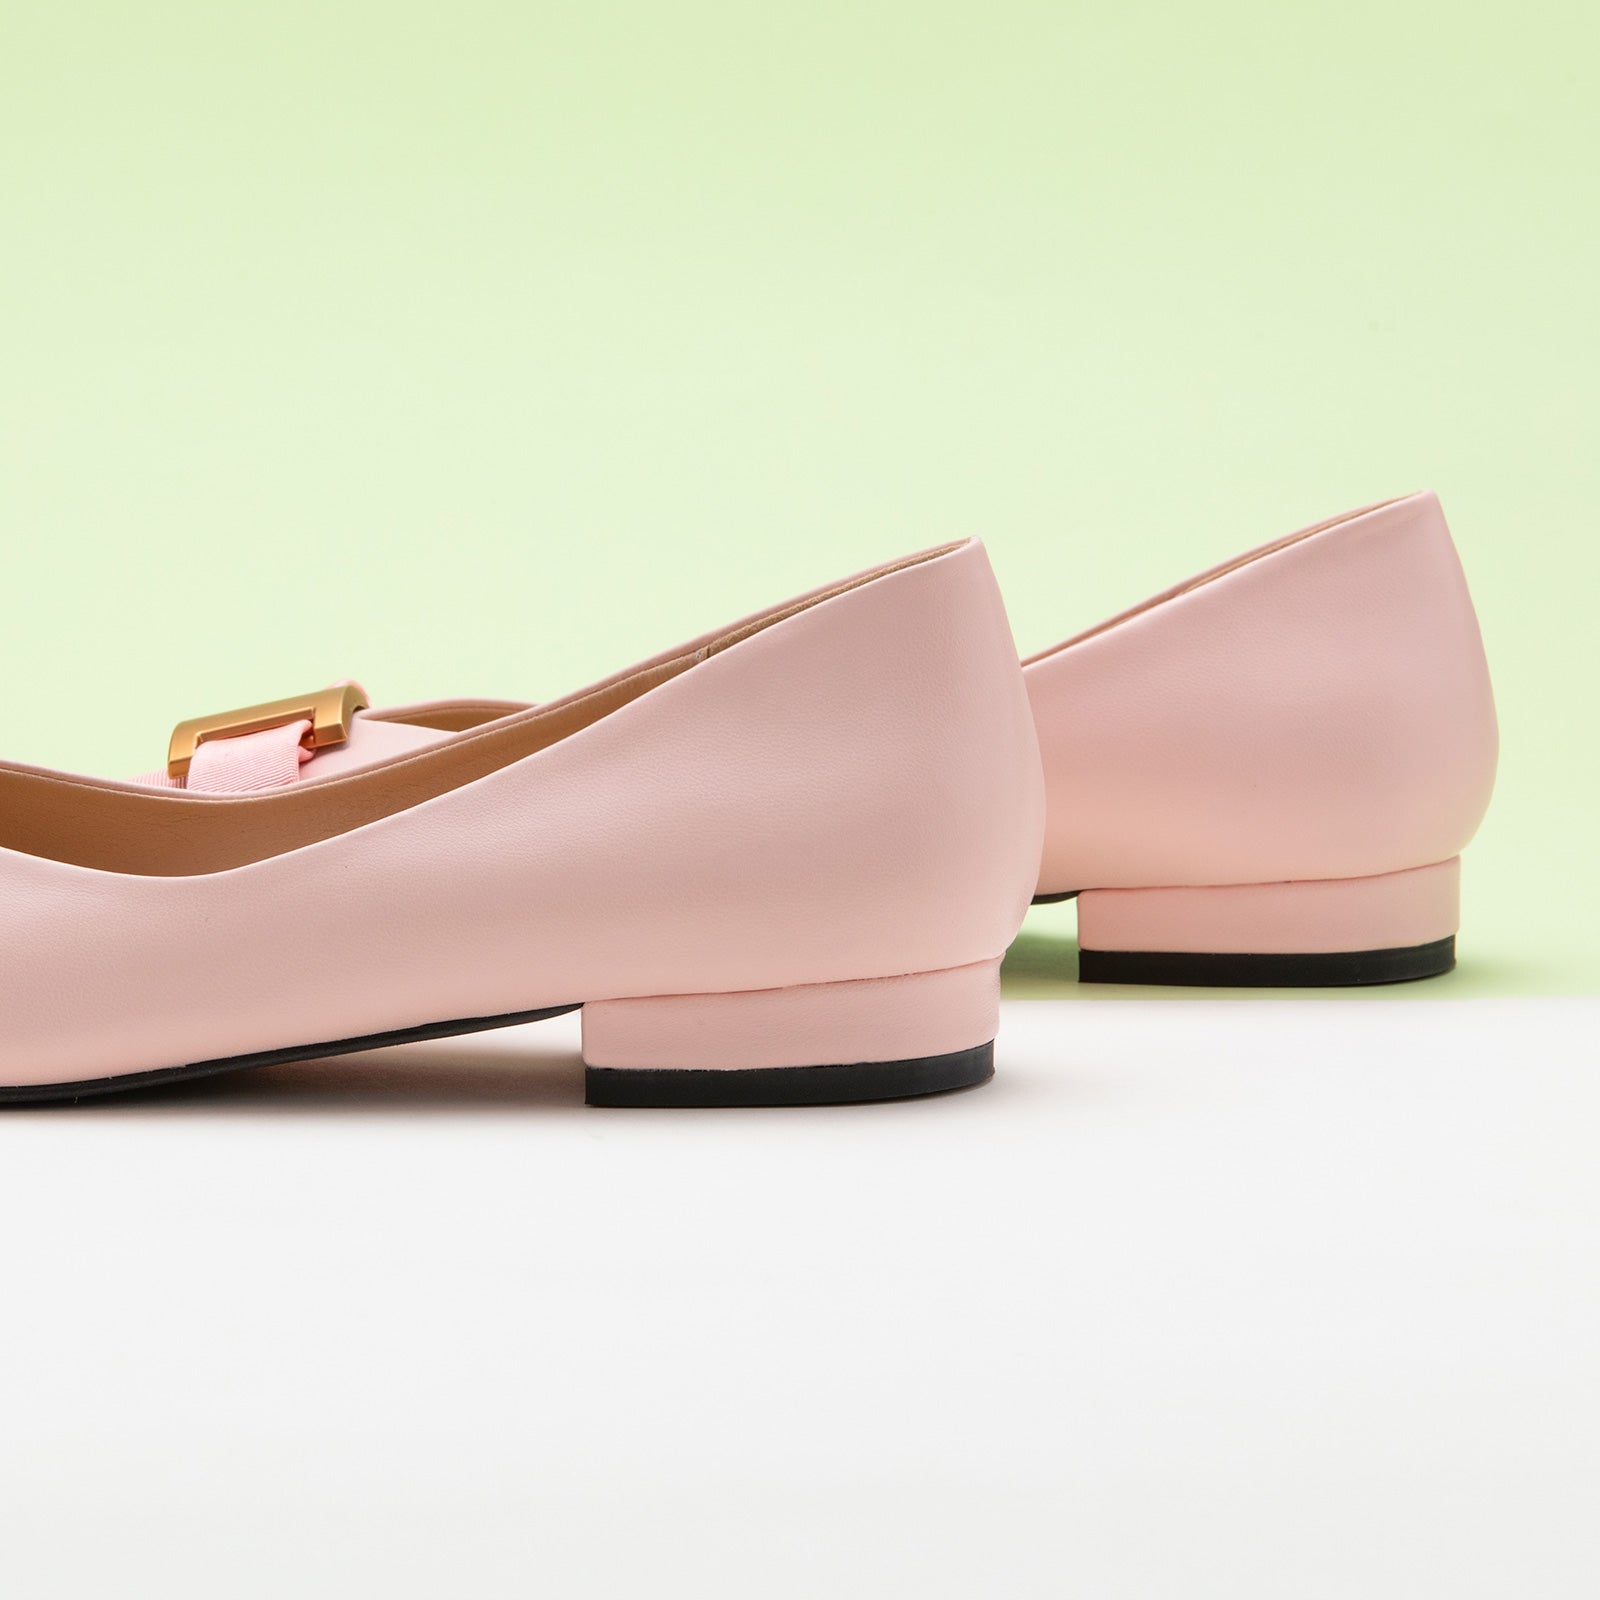 Blush Pink Elegance: Embellished Pink Leather Flats, featuring stylish details for a polished and sophisticated style.